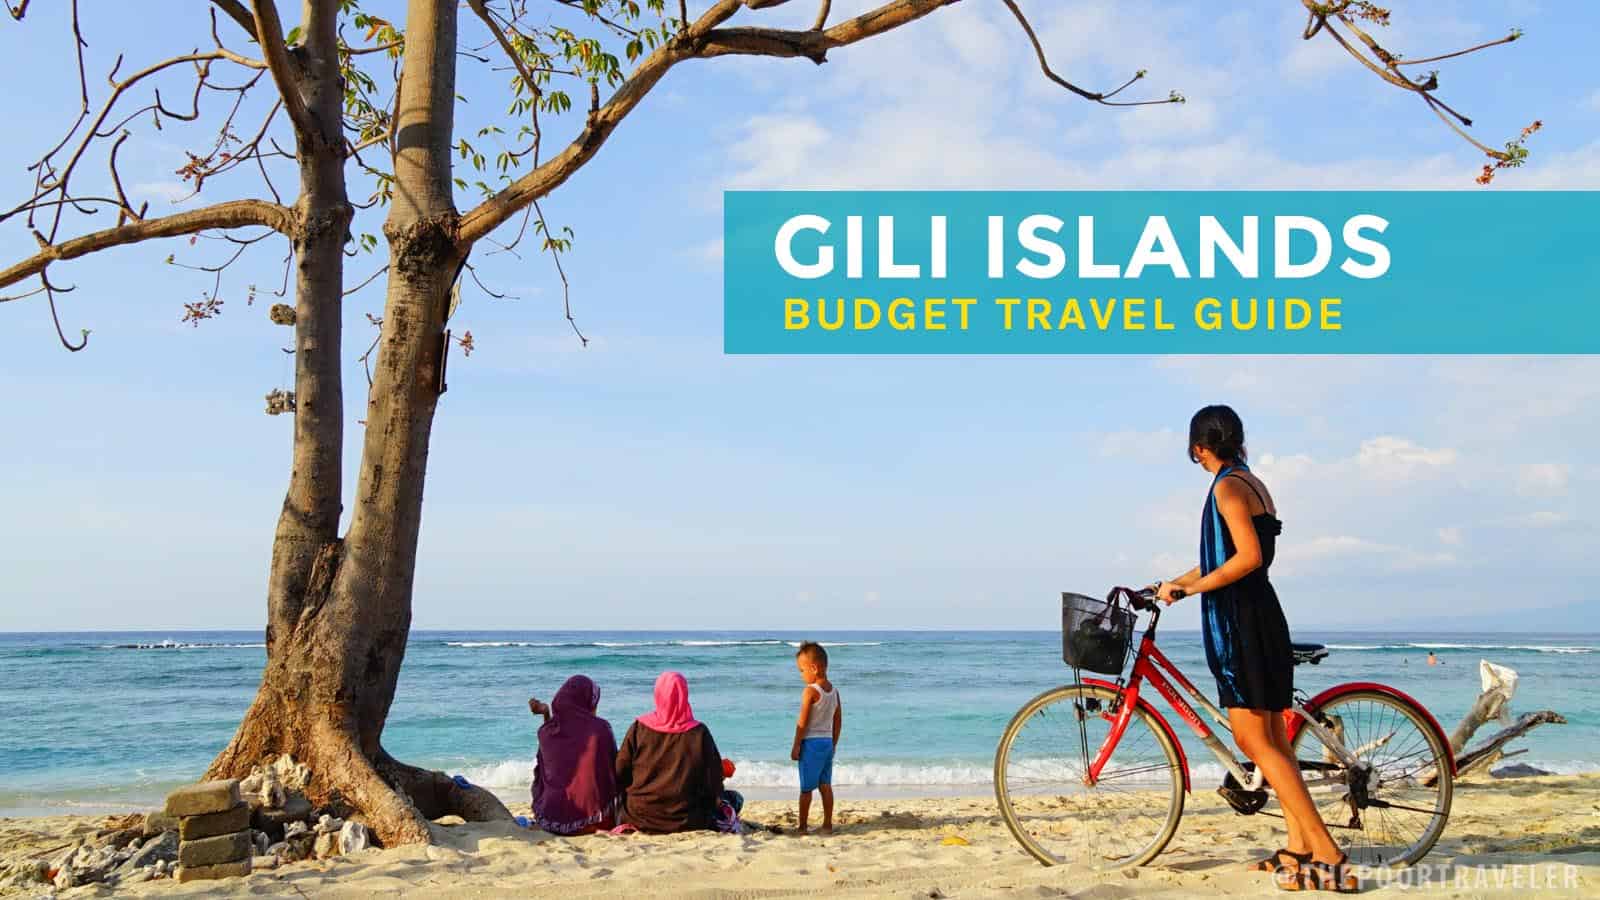 GILI ISLANDS ON A BUDGET: Travel Guide & Itinerary